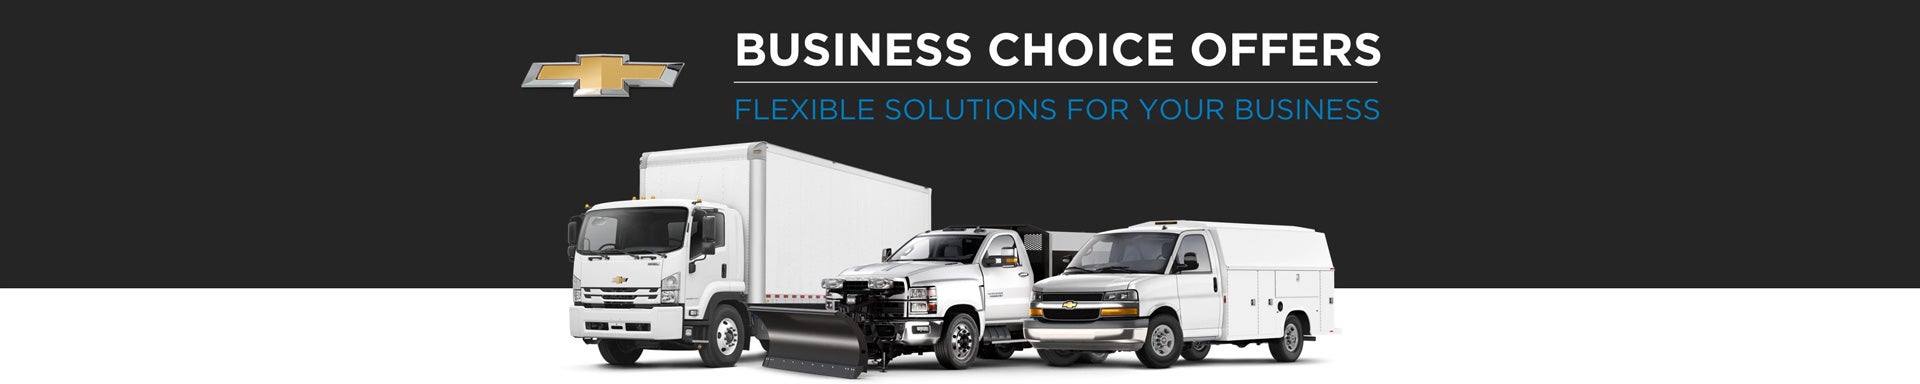 Chevrolet Business Choice Offers - Flexible Solutions for your Business - Stevinson Chevrolet in Lakewood CO